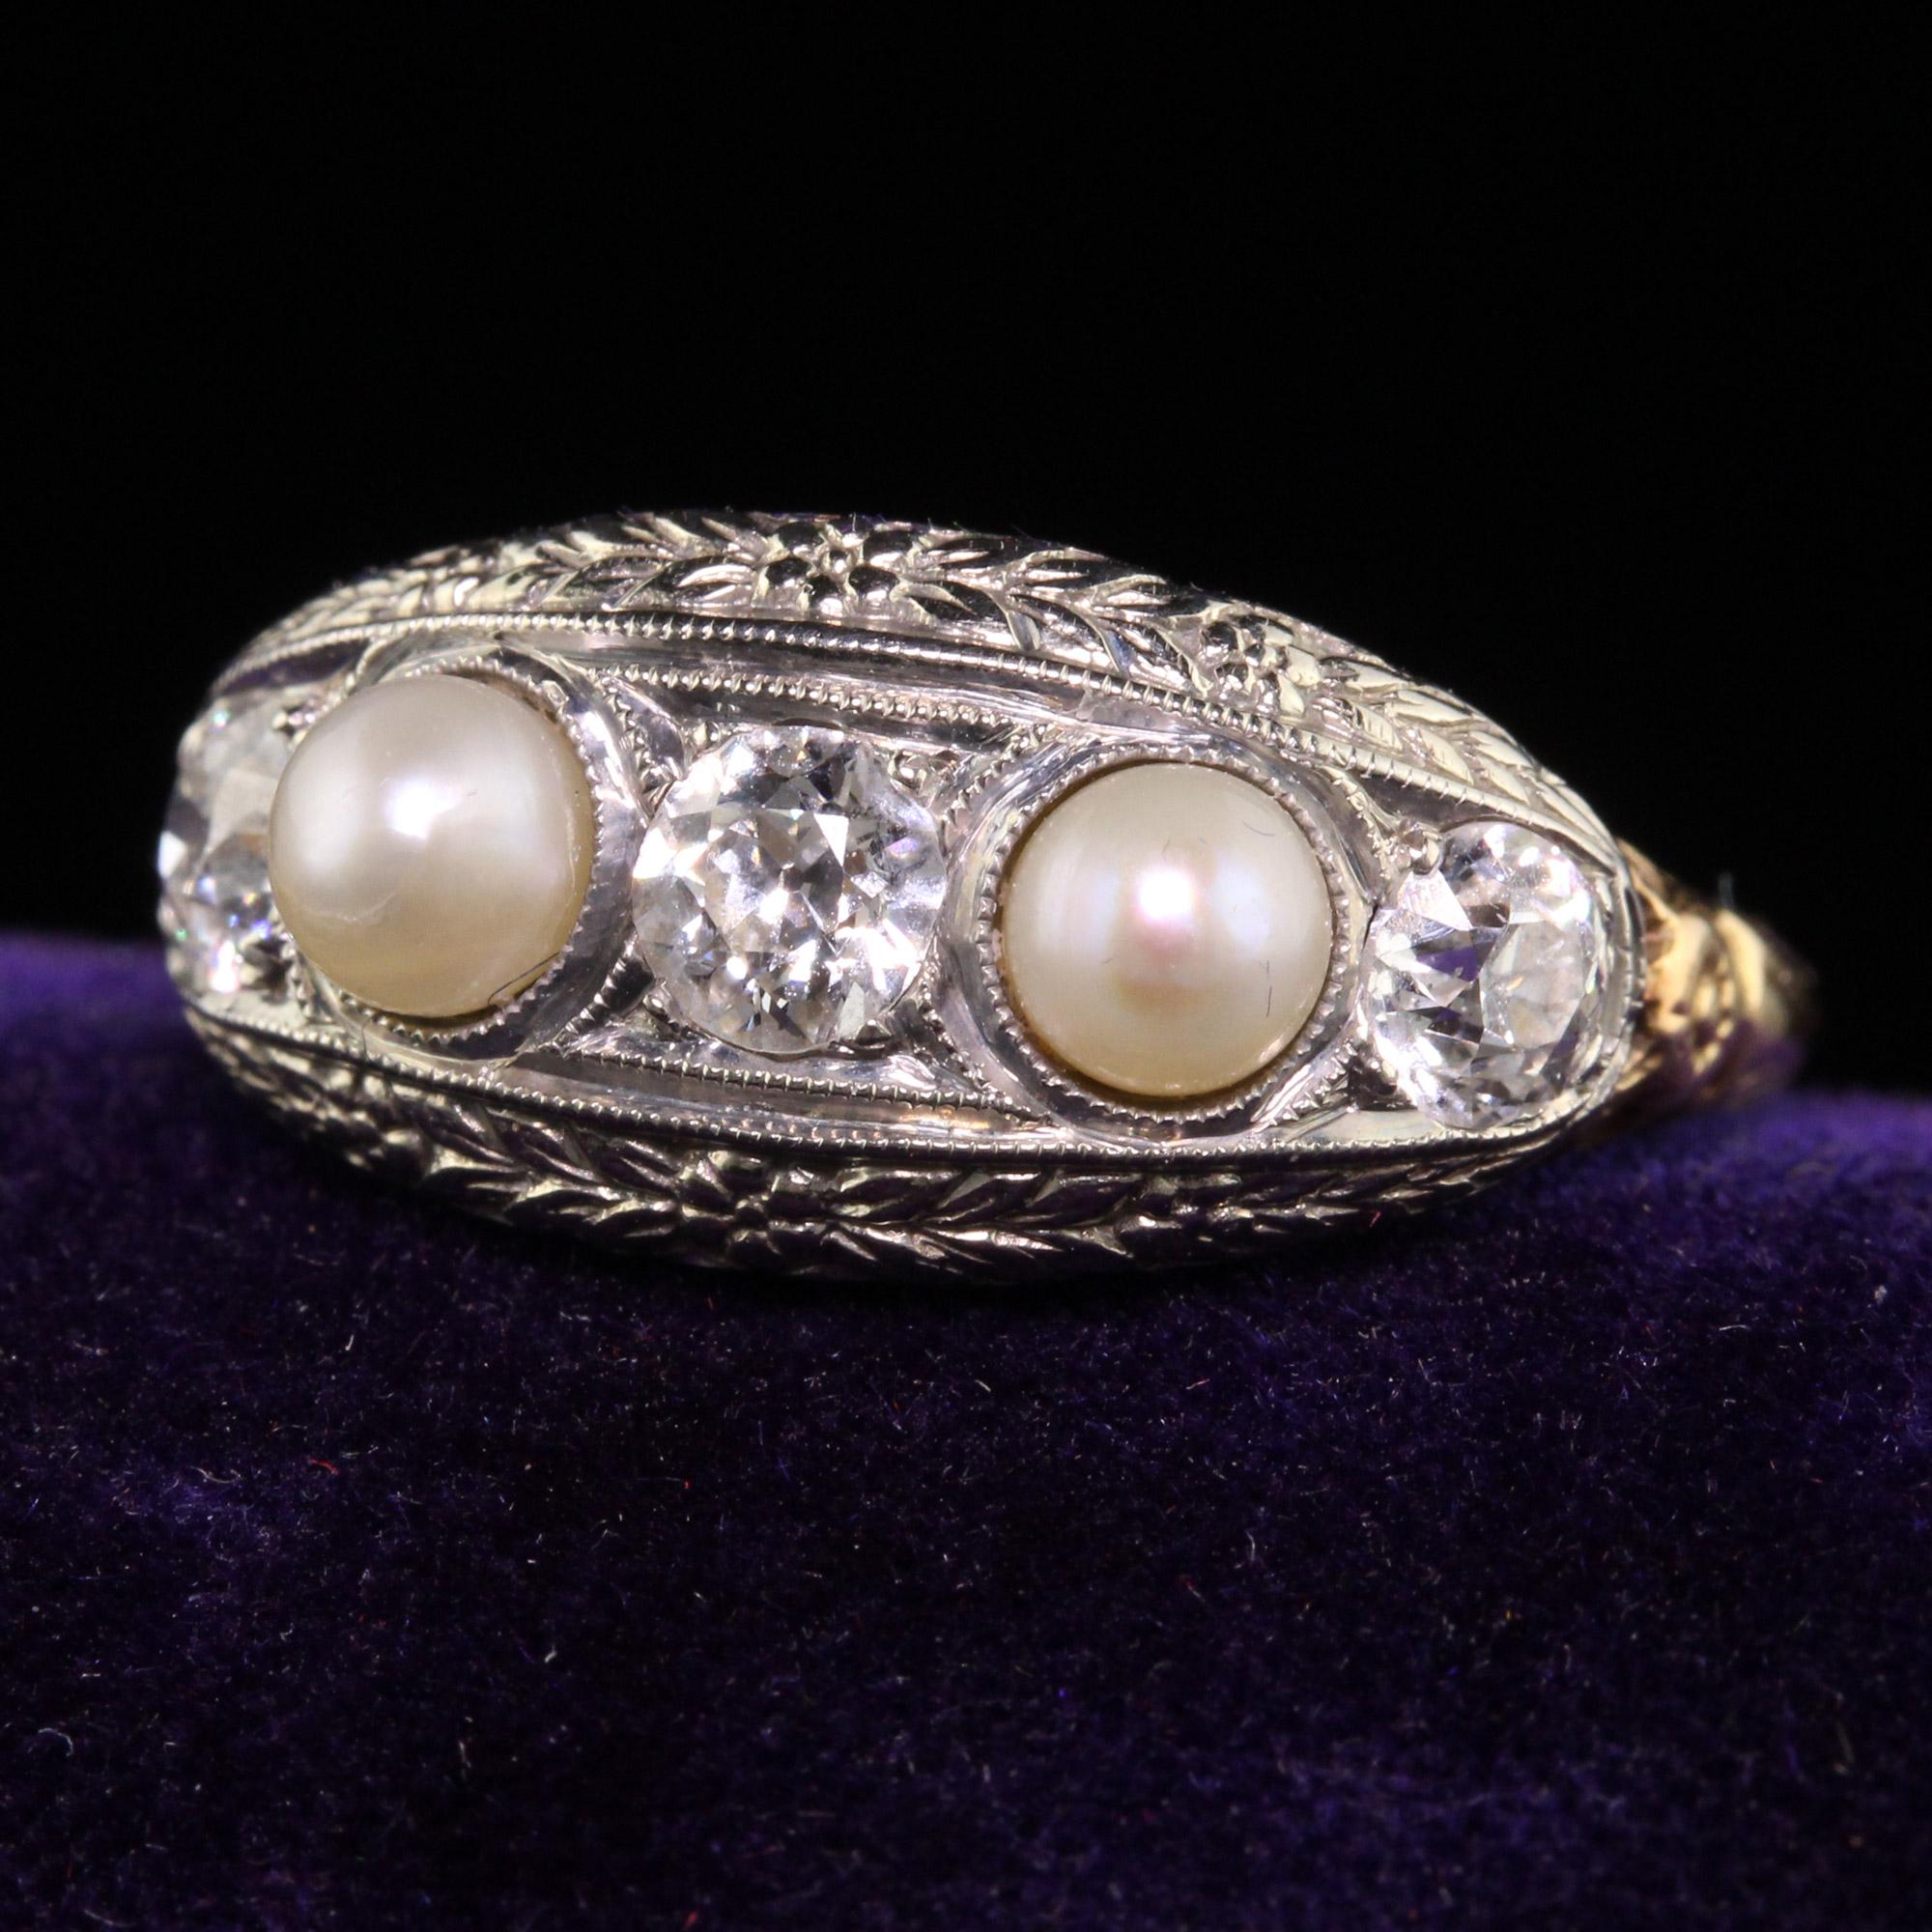 Beautiful Antique Art Deco 18K and 14K Yellow Gold Old Euro Diamond Natural Pearl Ring. This gorgeous five stone ring is crafted in 14k yellow gold and 18k white gold top. The ring has three beautiful old european cut diamonds and two natural